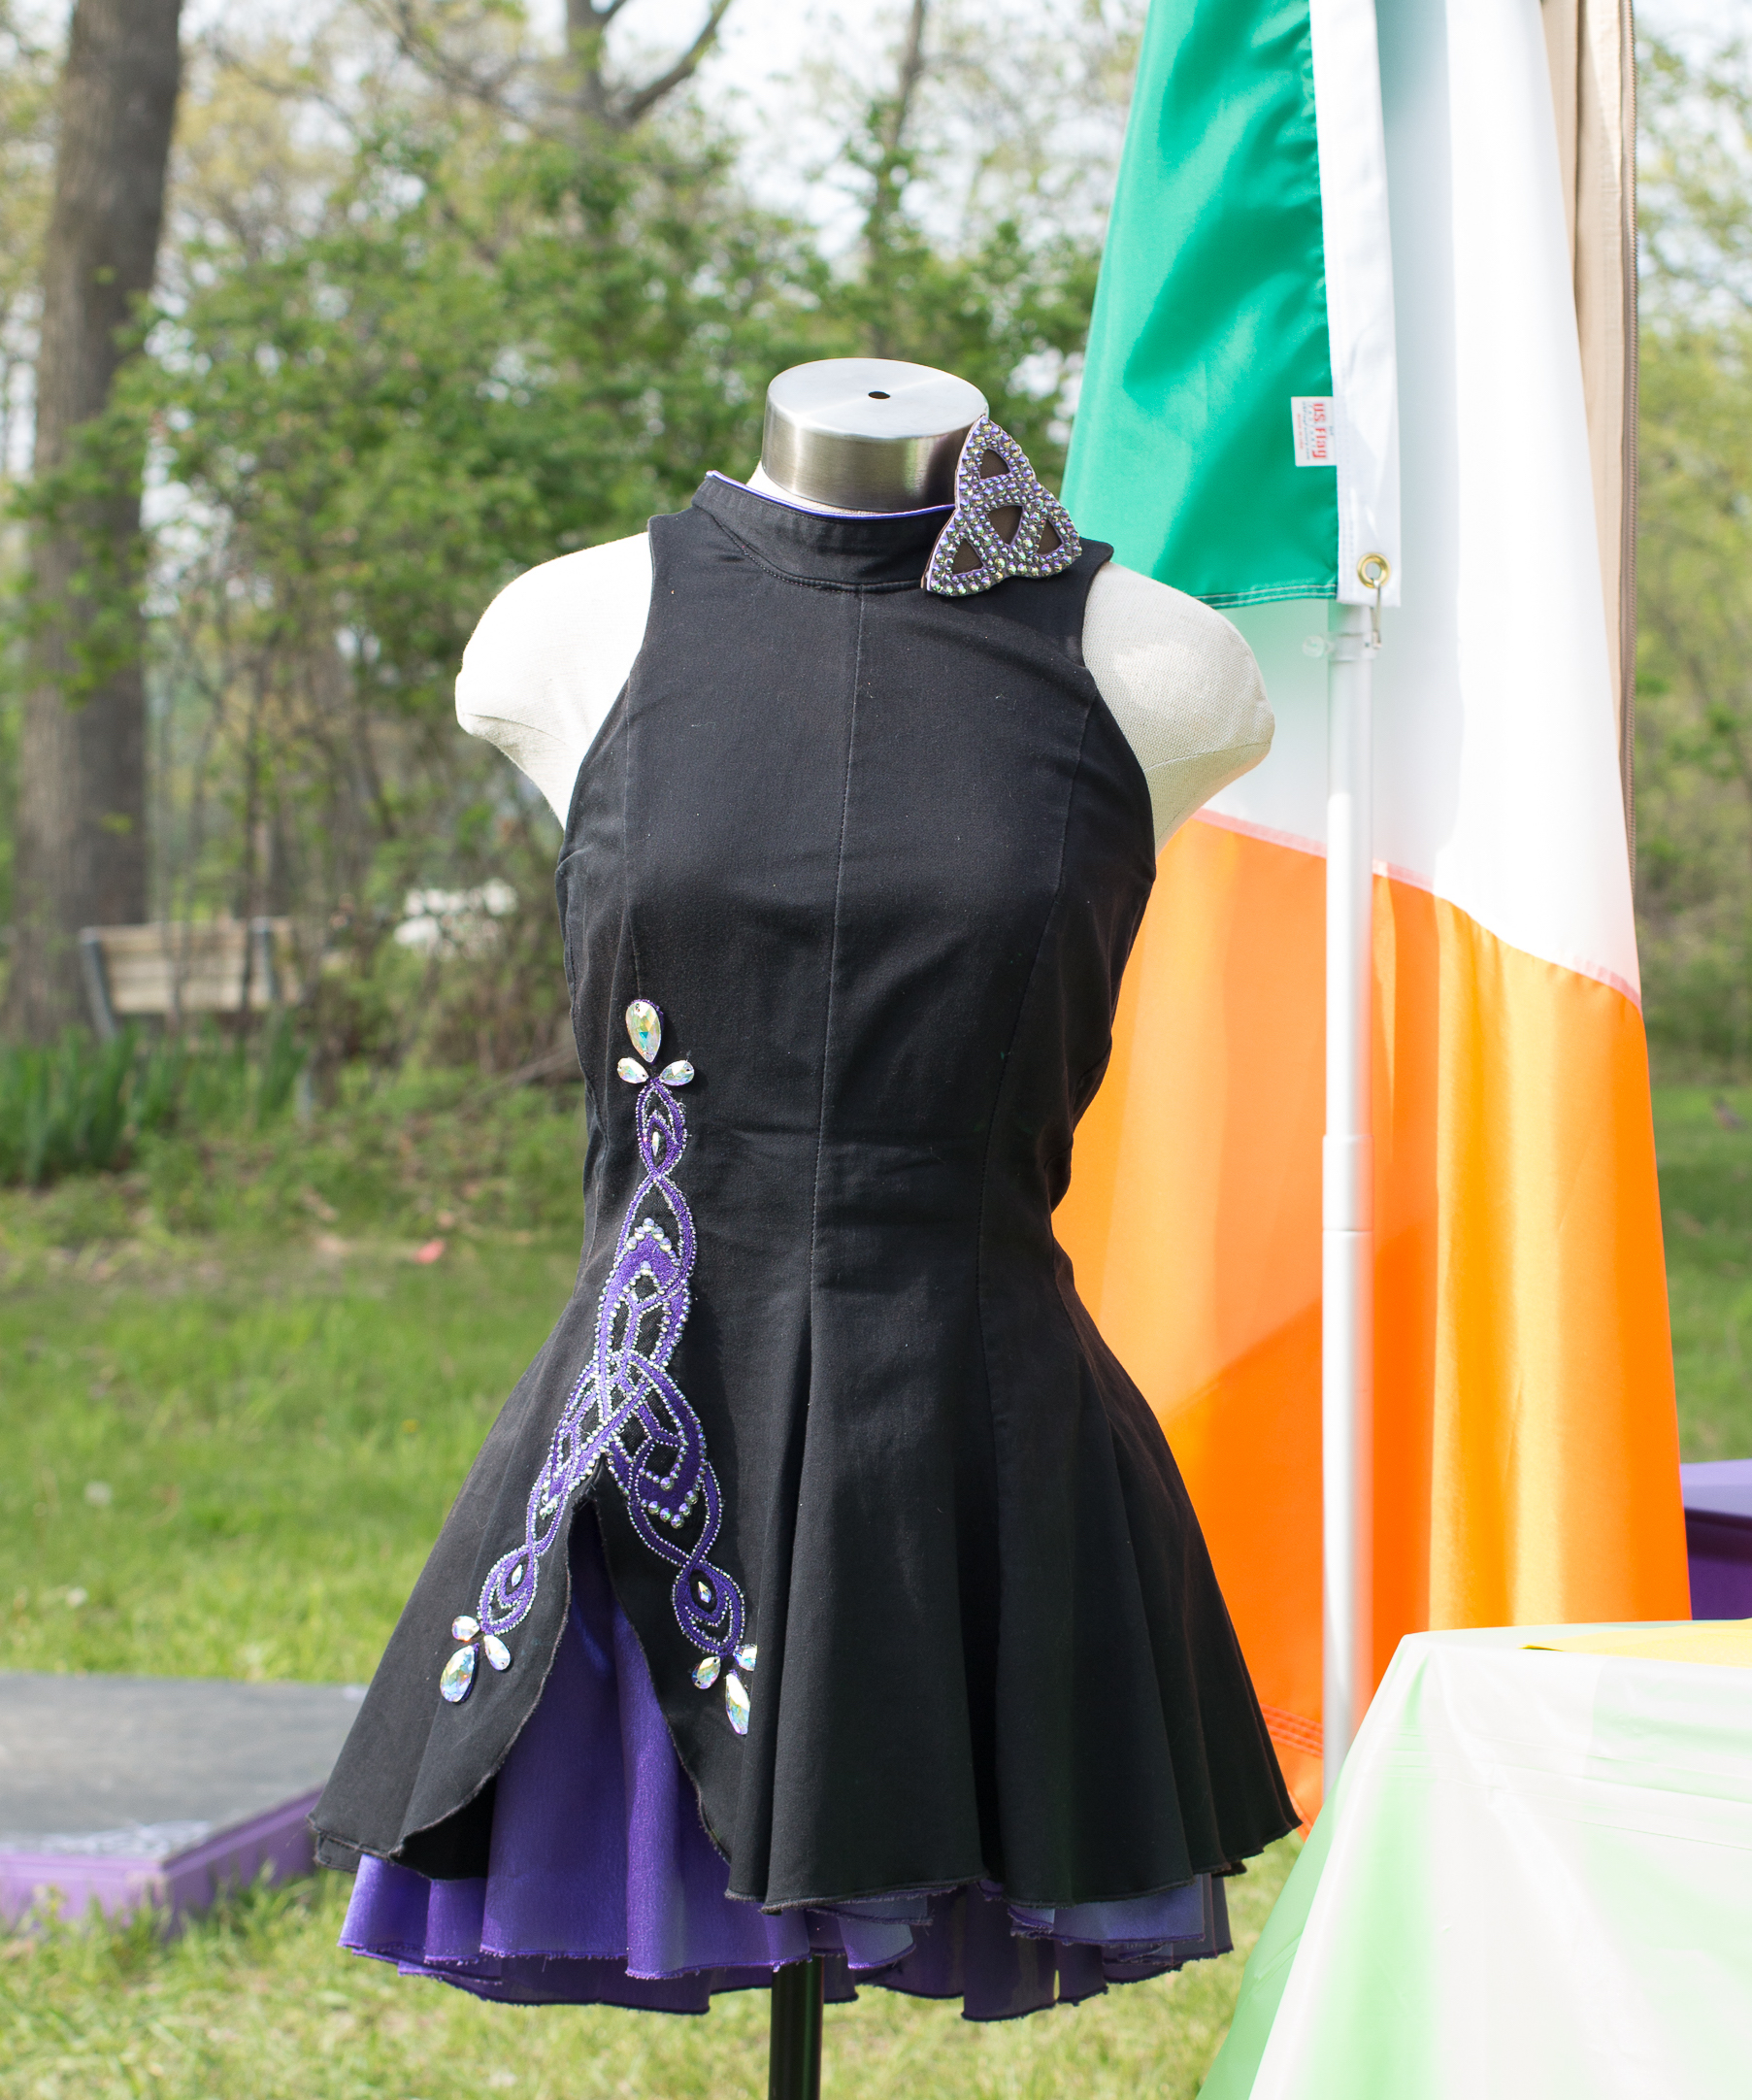 Motor City Irish Dance uniform on display at The Greater Rochester Heritage Days Festival.